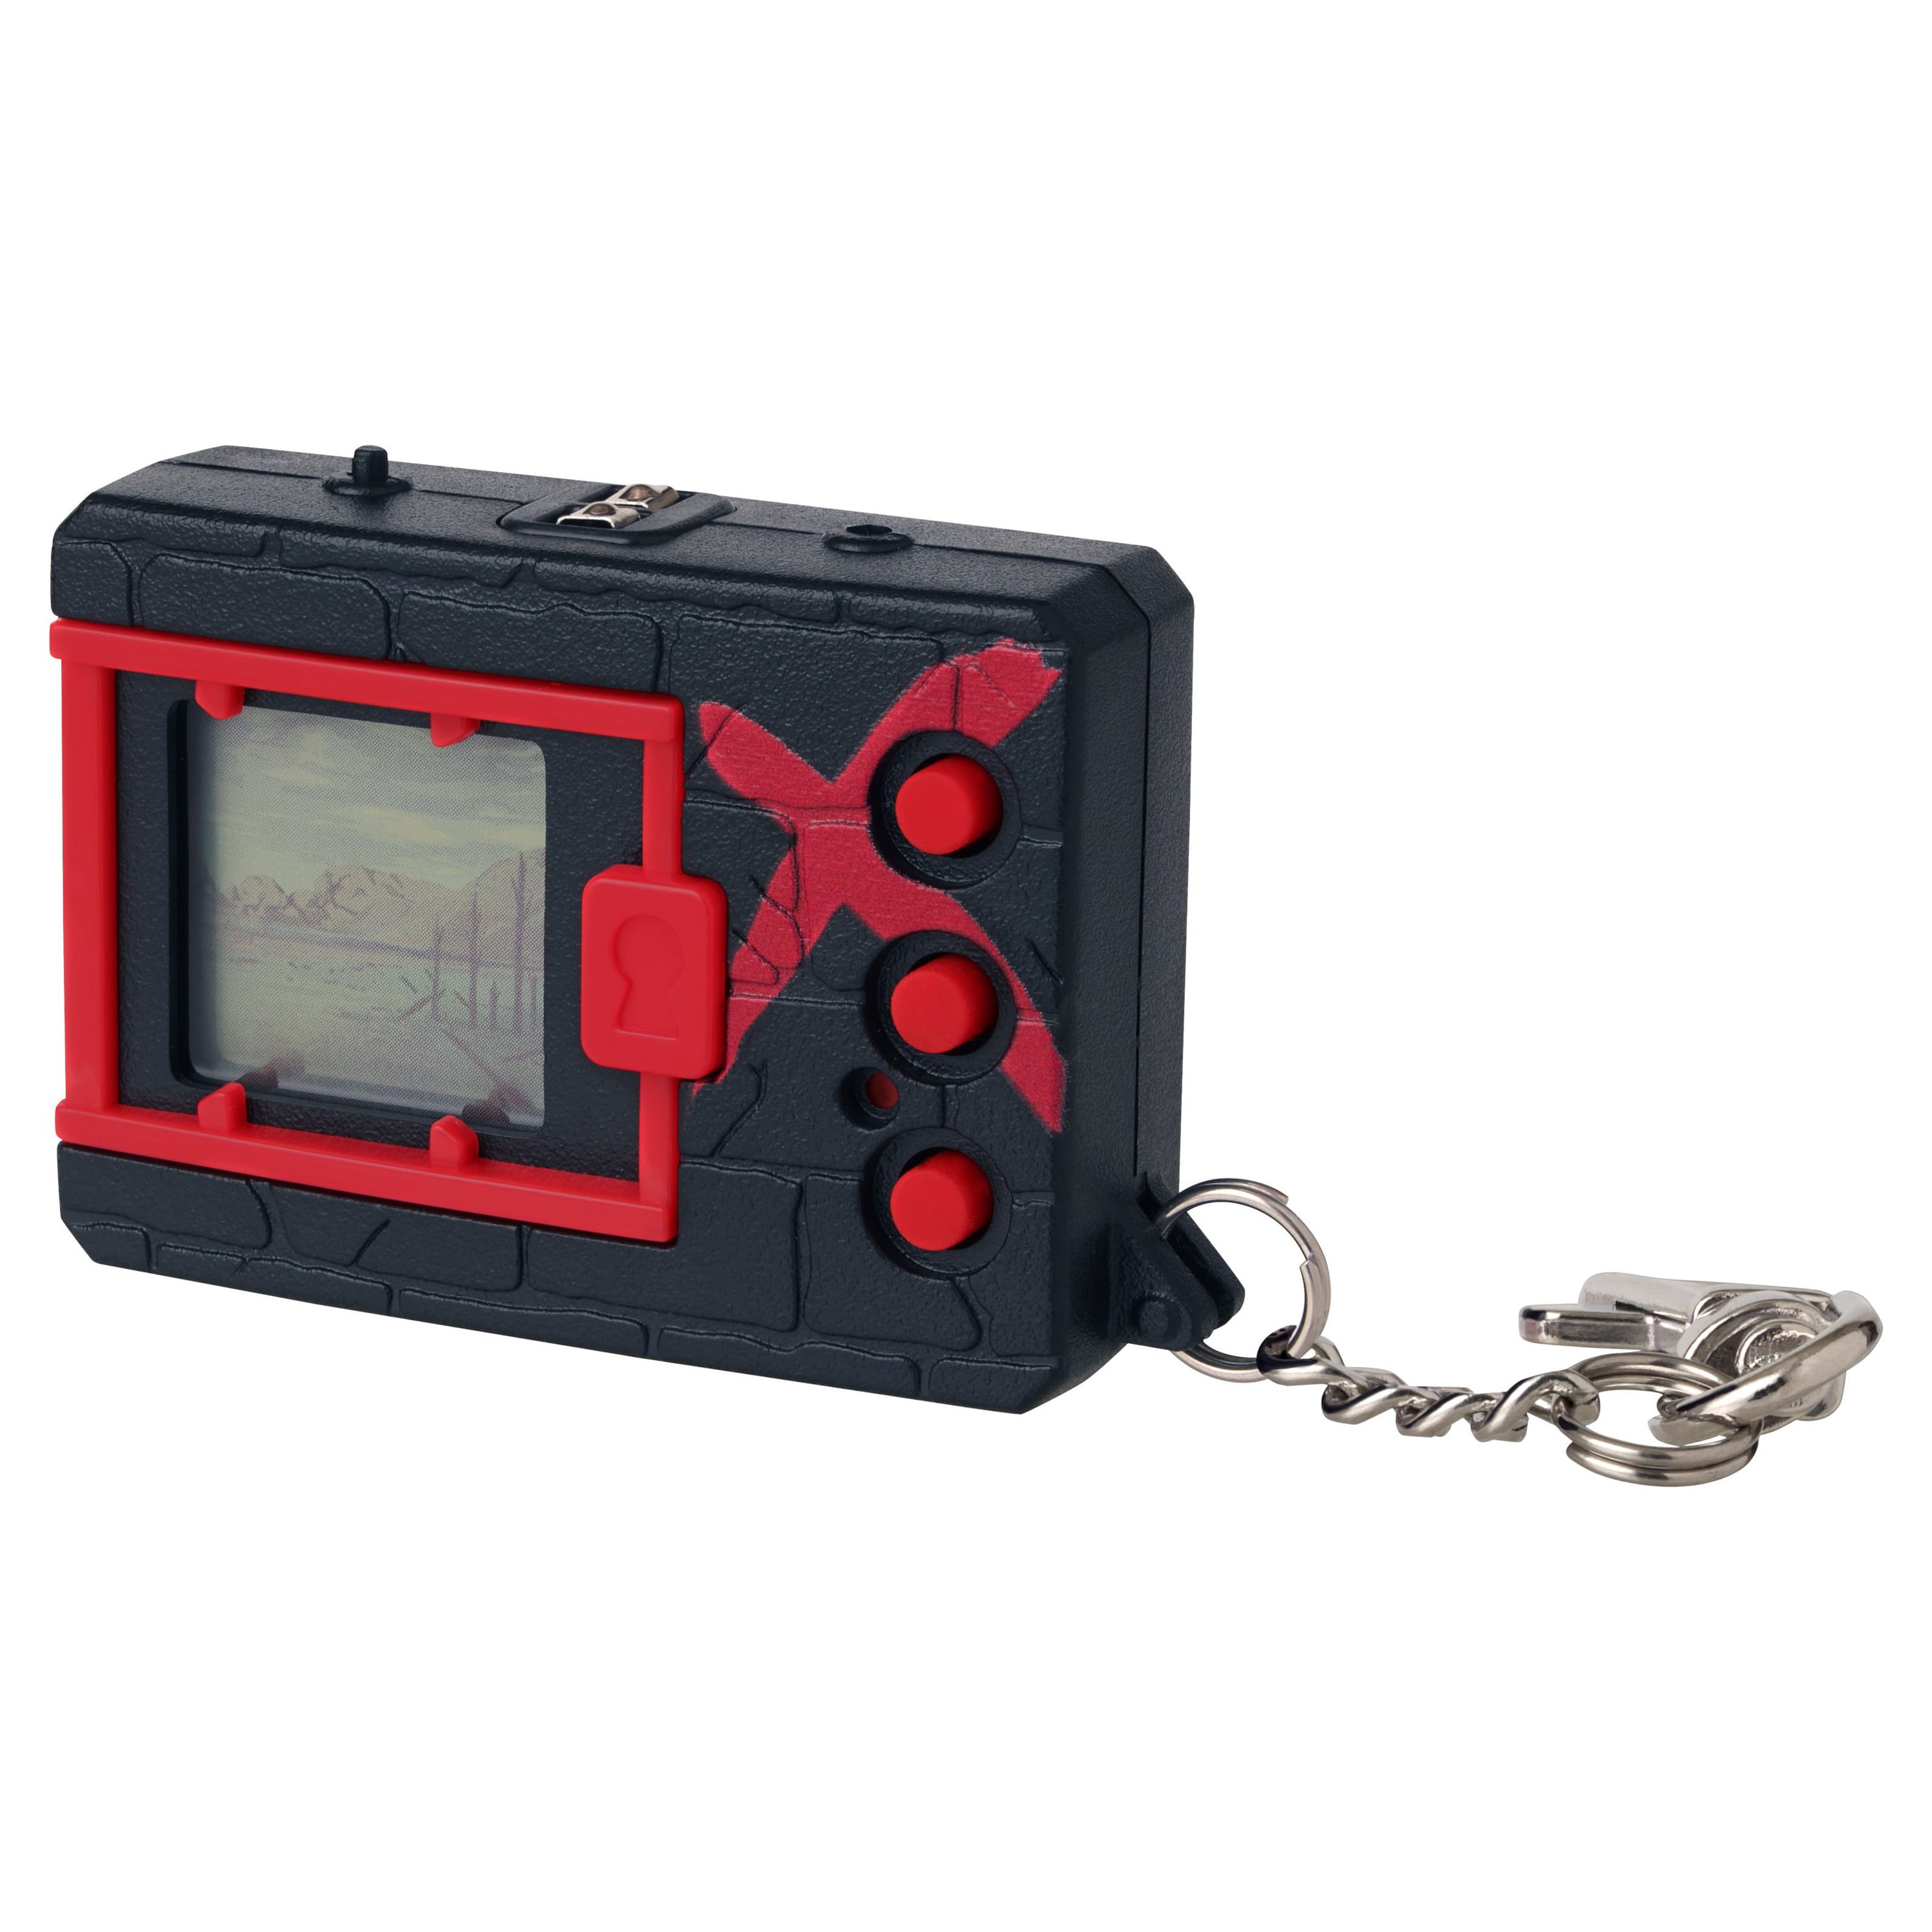 Digimon X Electronic Monster Toy ( Black & Red) - image 2 of 5